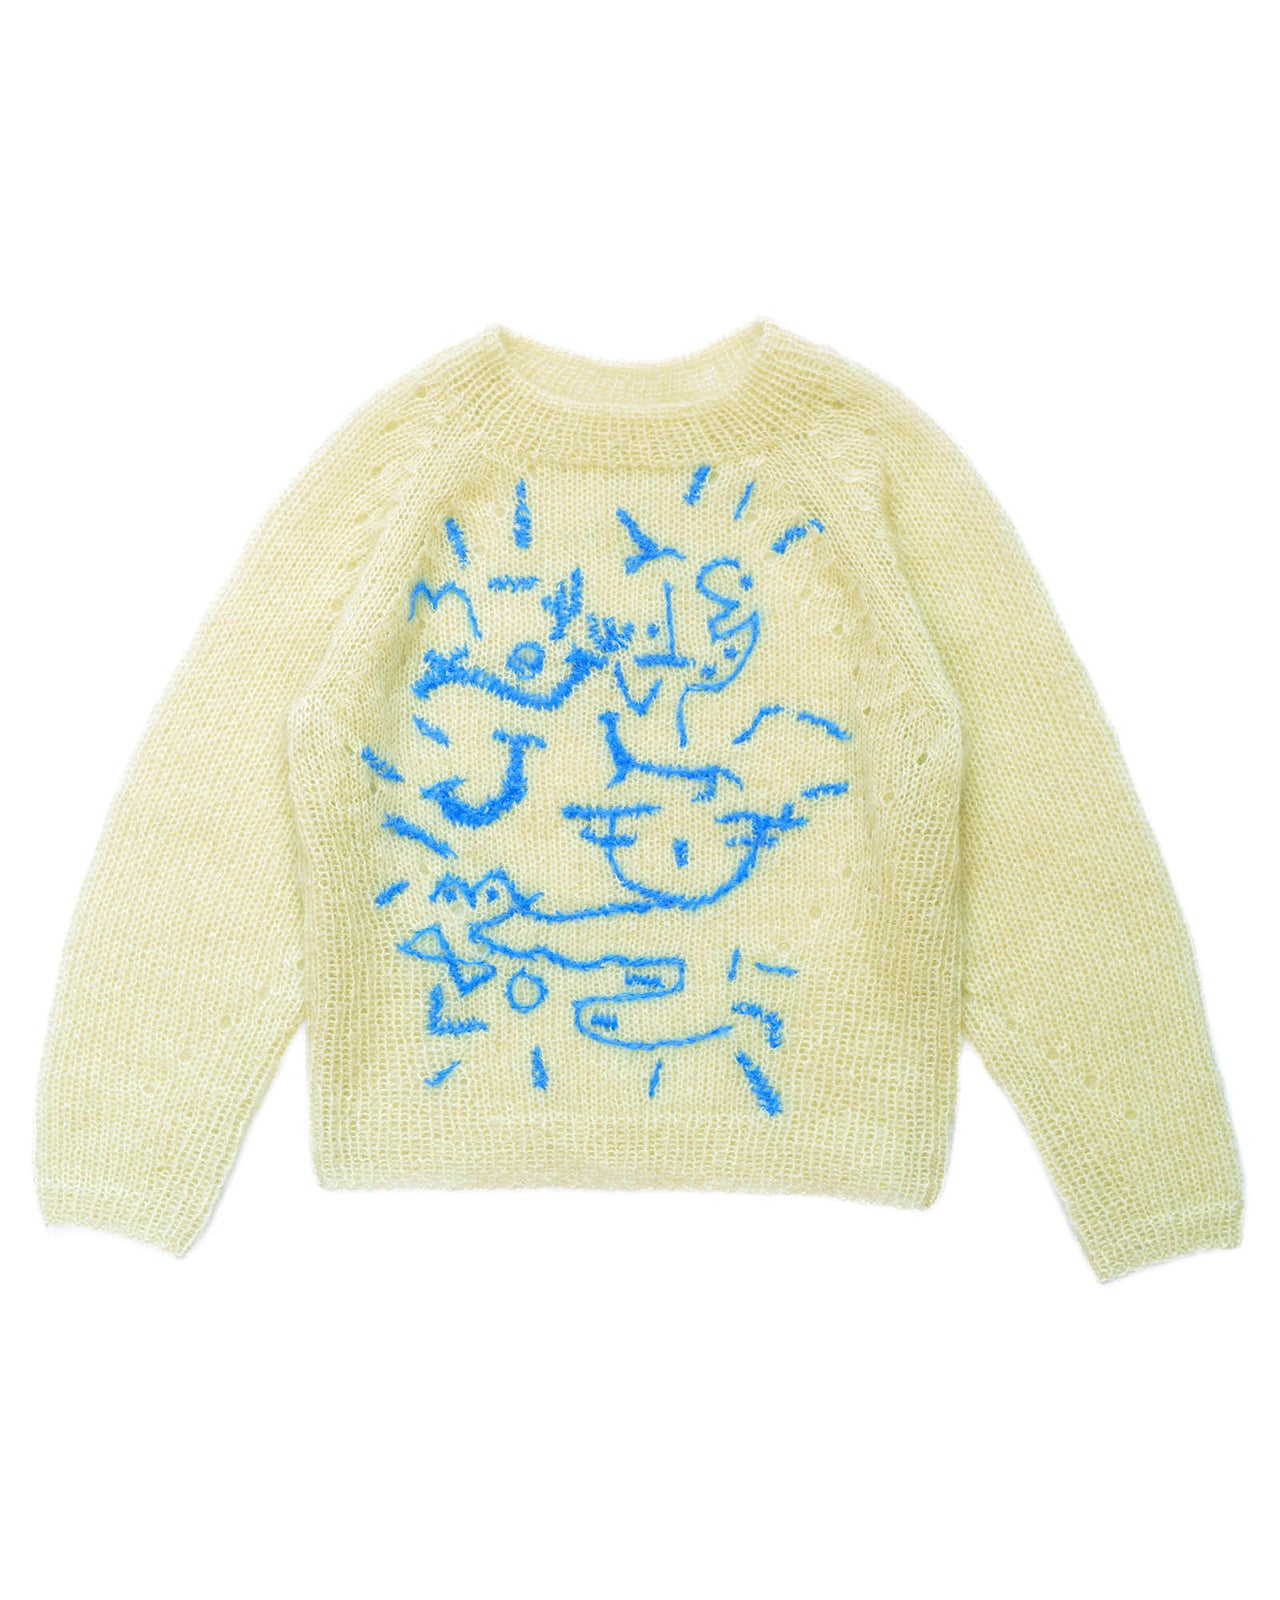 Lime coloured sweater laid flat on white background. The sweater is adorned with sky blue abstract embroidered lines. 